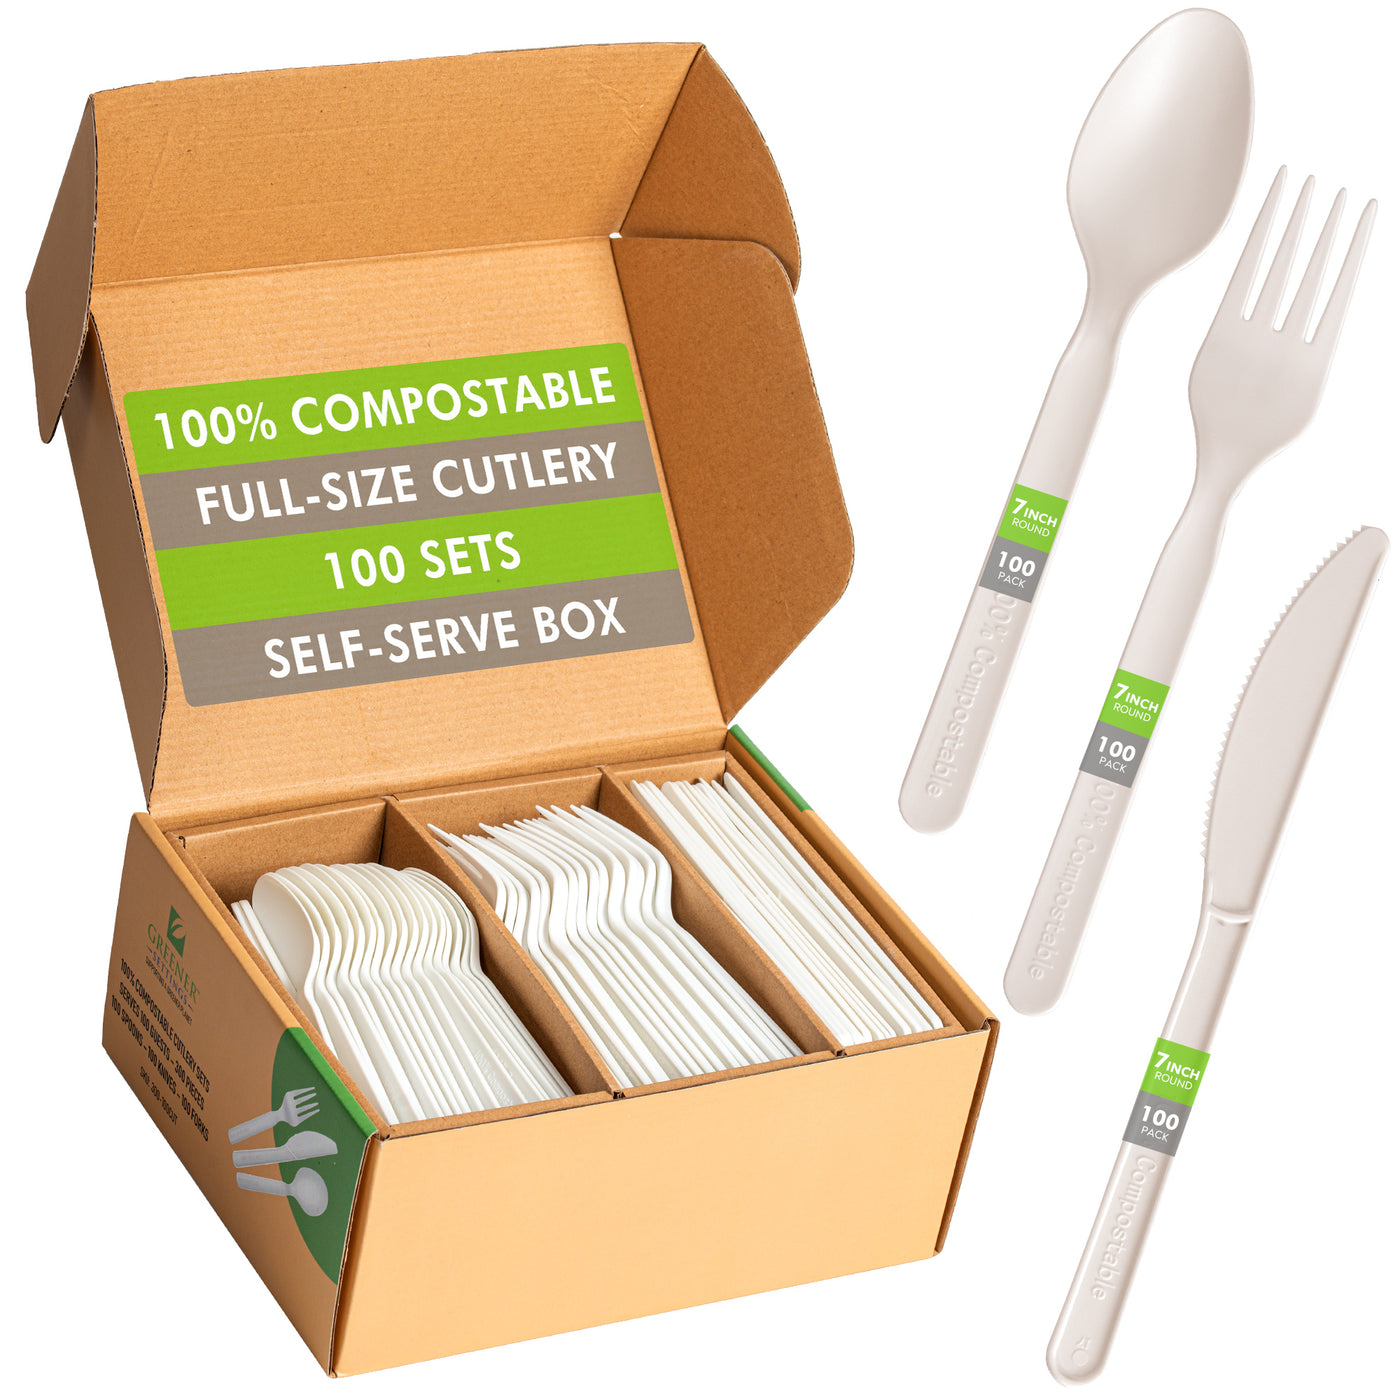 Compostable Disposable Plant Based Cutlery Set (100 Sets) - Perfect Settings Tableware